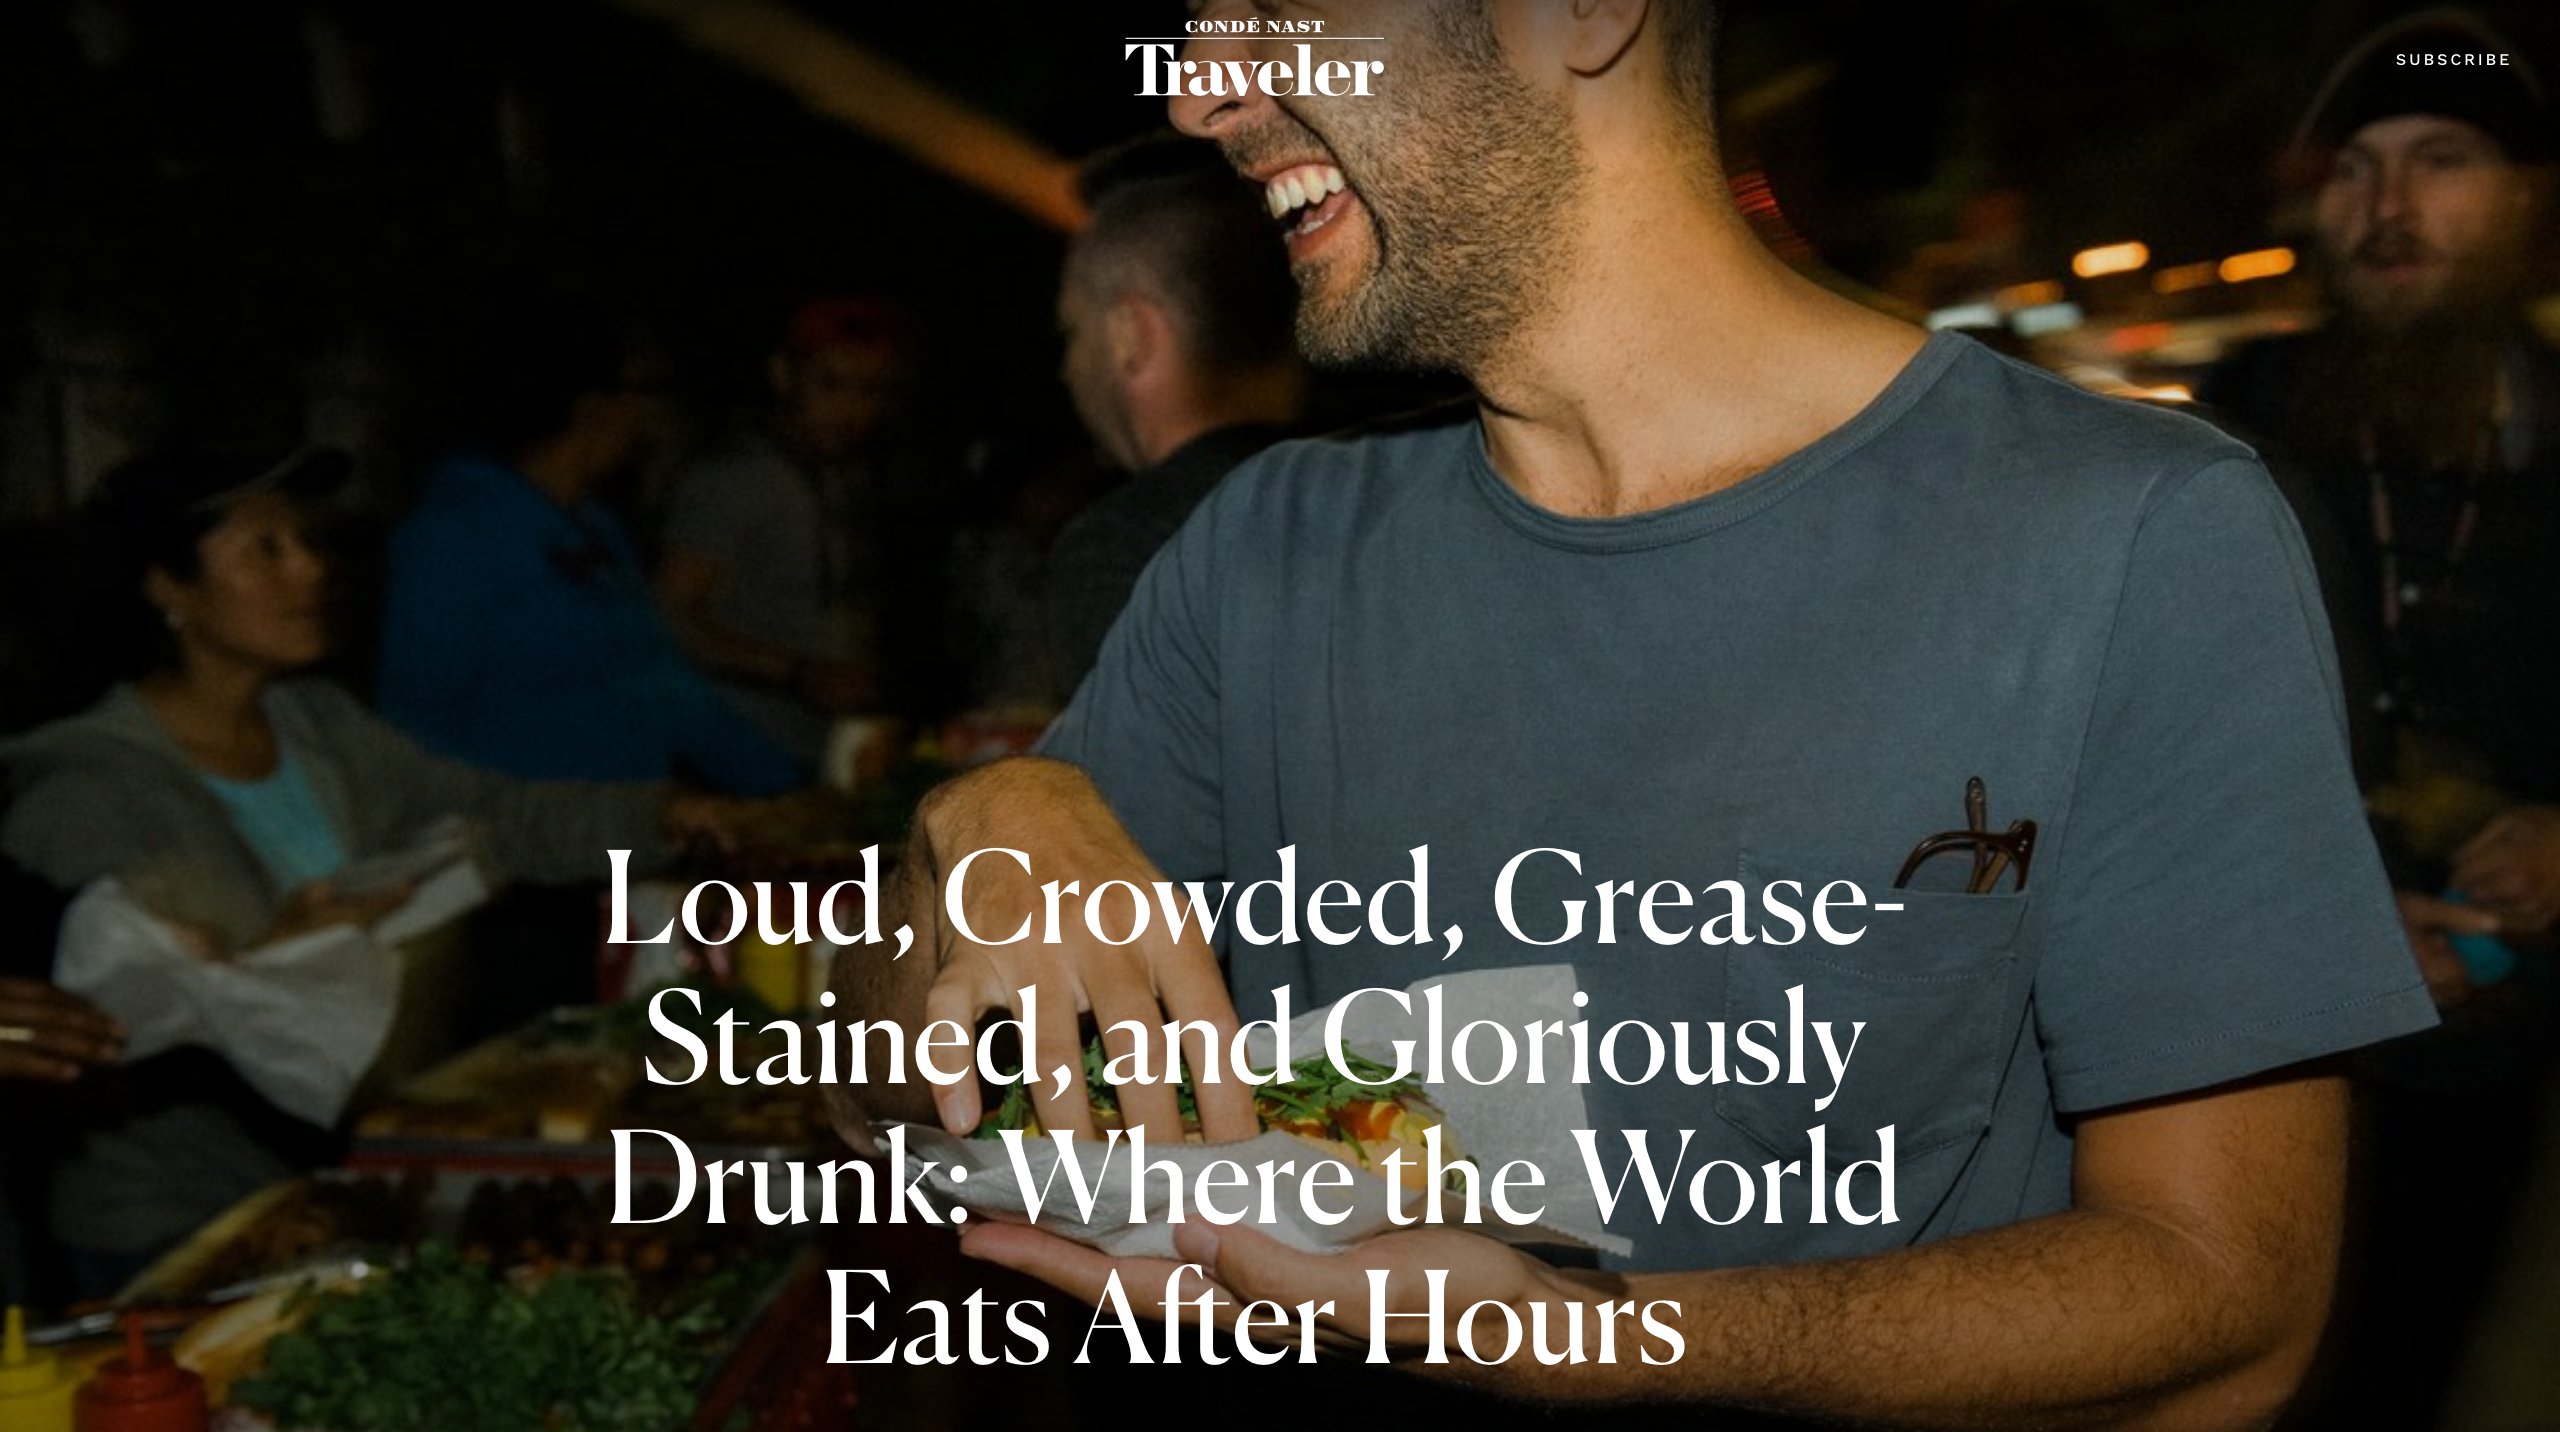 Condé Nast Traveler: Where the World Eats After Hours